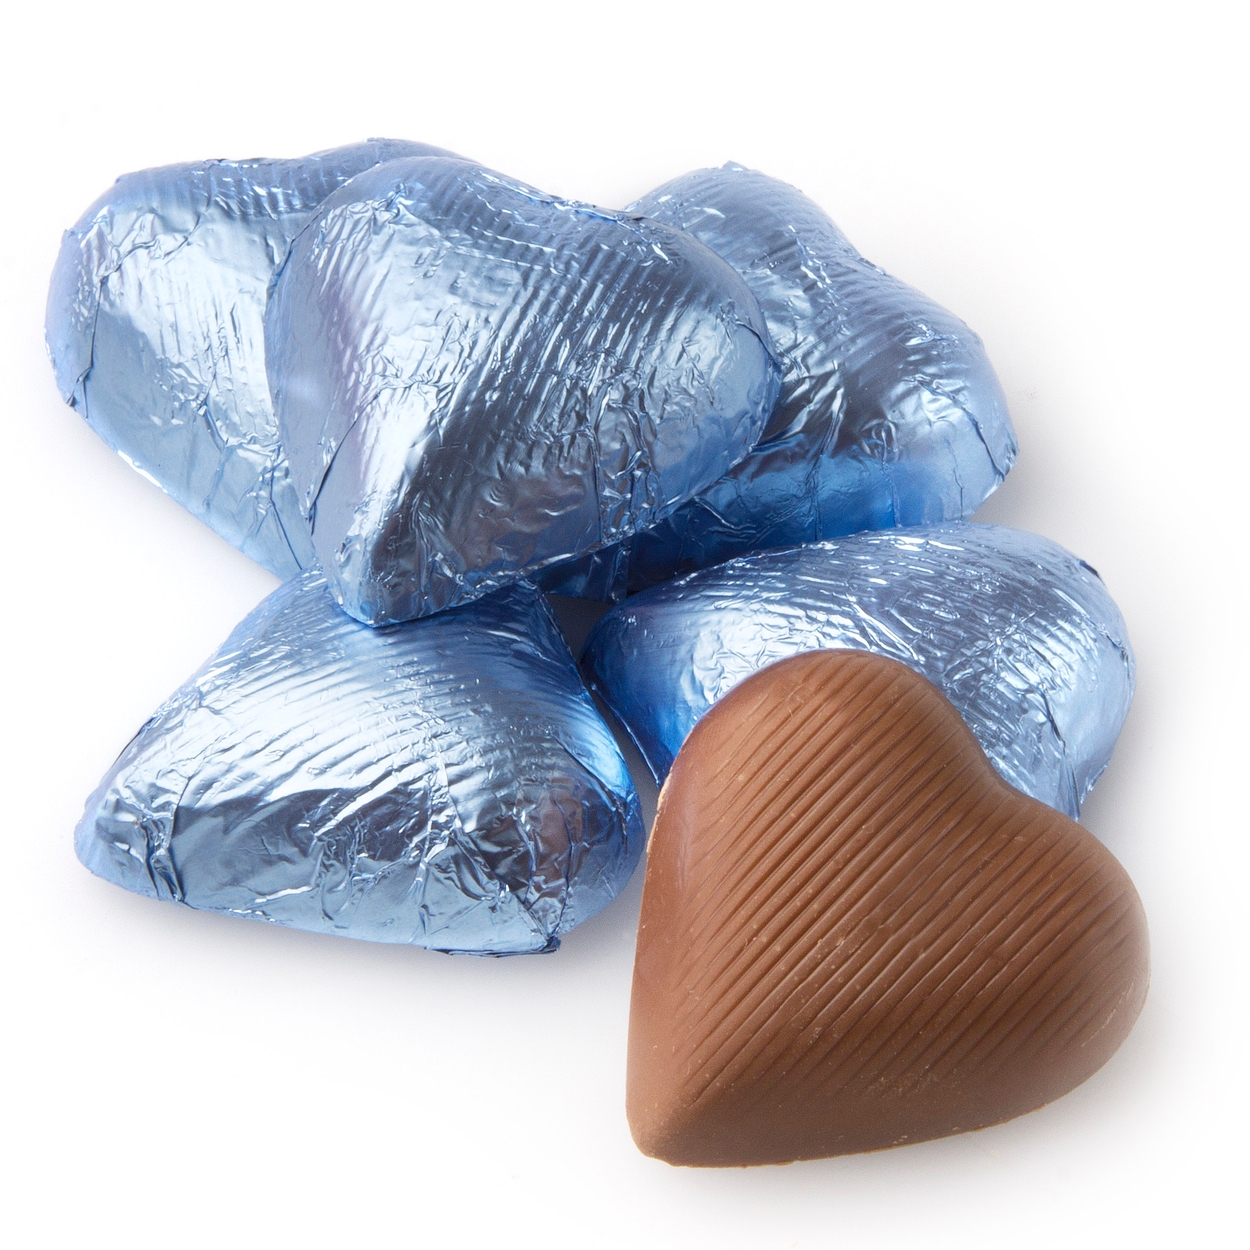 Baby Blue Chocolate Candy Hearts • Oh! Nuts®